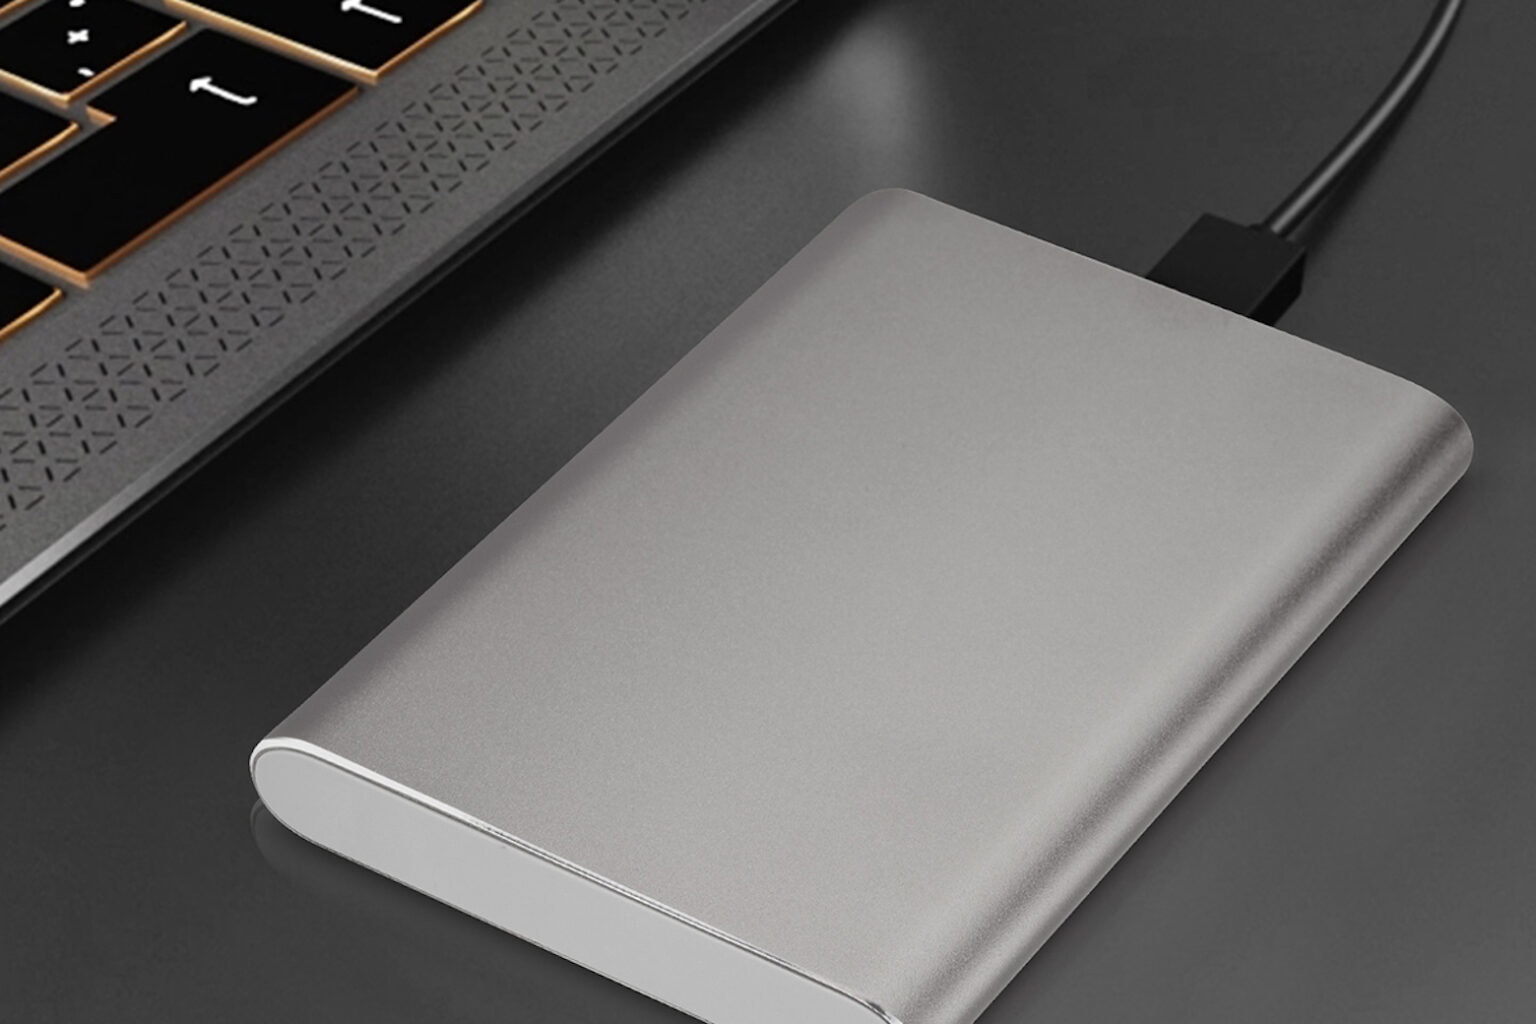 At 500GB, this external hard drives offers extra space for storage or transferring data.